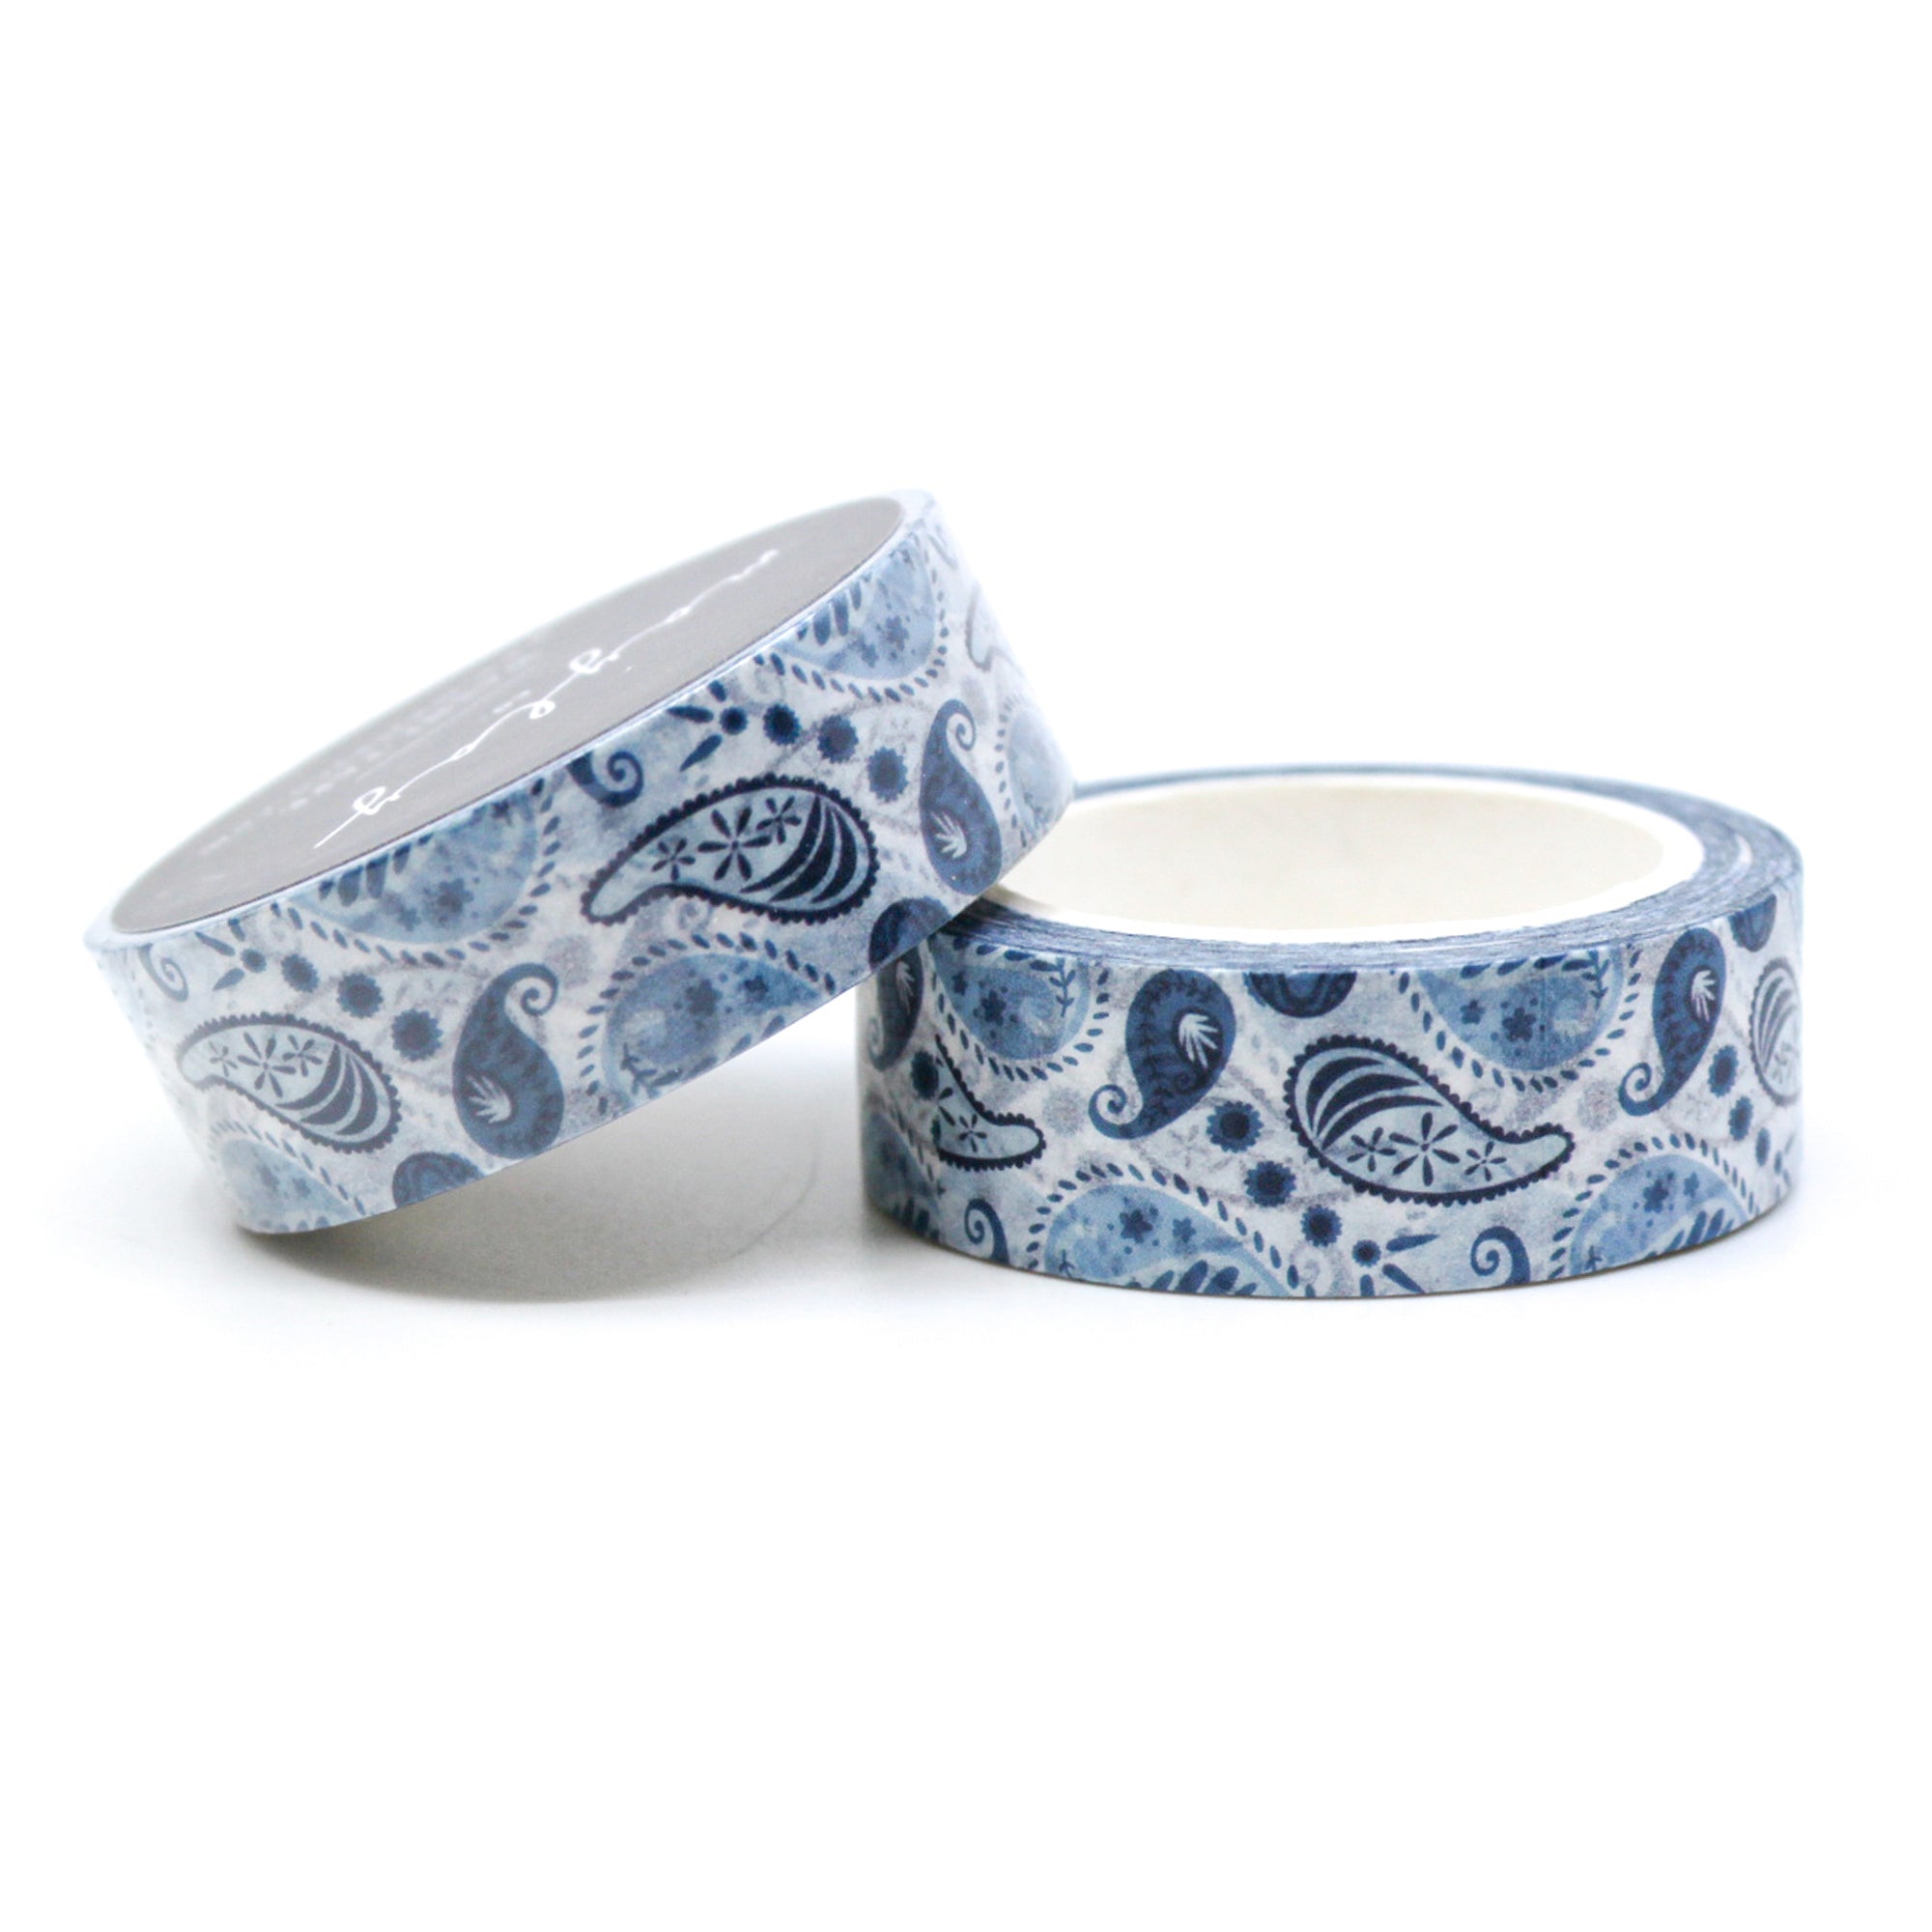 Elevate your crafts with our Embroidery Blue Paisley Washi Tape, featuring a intricate paisley pattern in shades of blue. Ideal for adding a touch of intricate elegance to your projects. This tape is from Maylay Co. and sold at BBB Supplies Craft Shop.